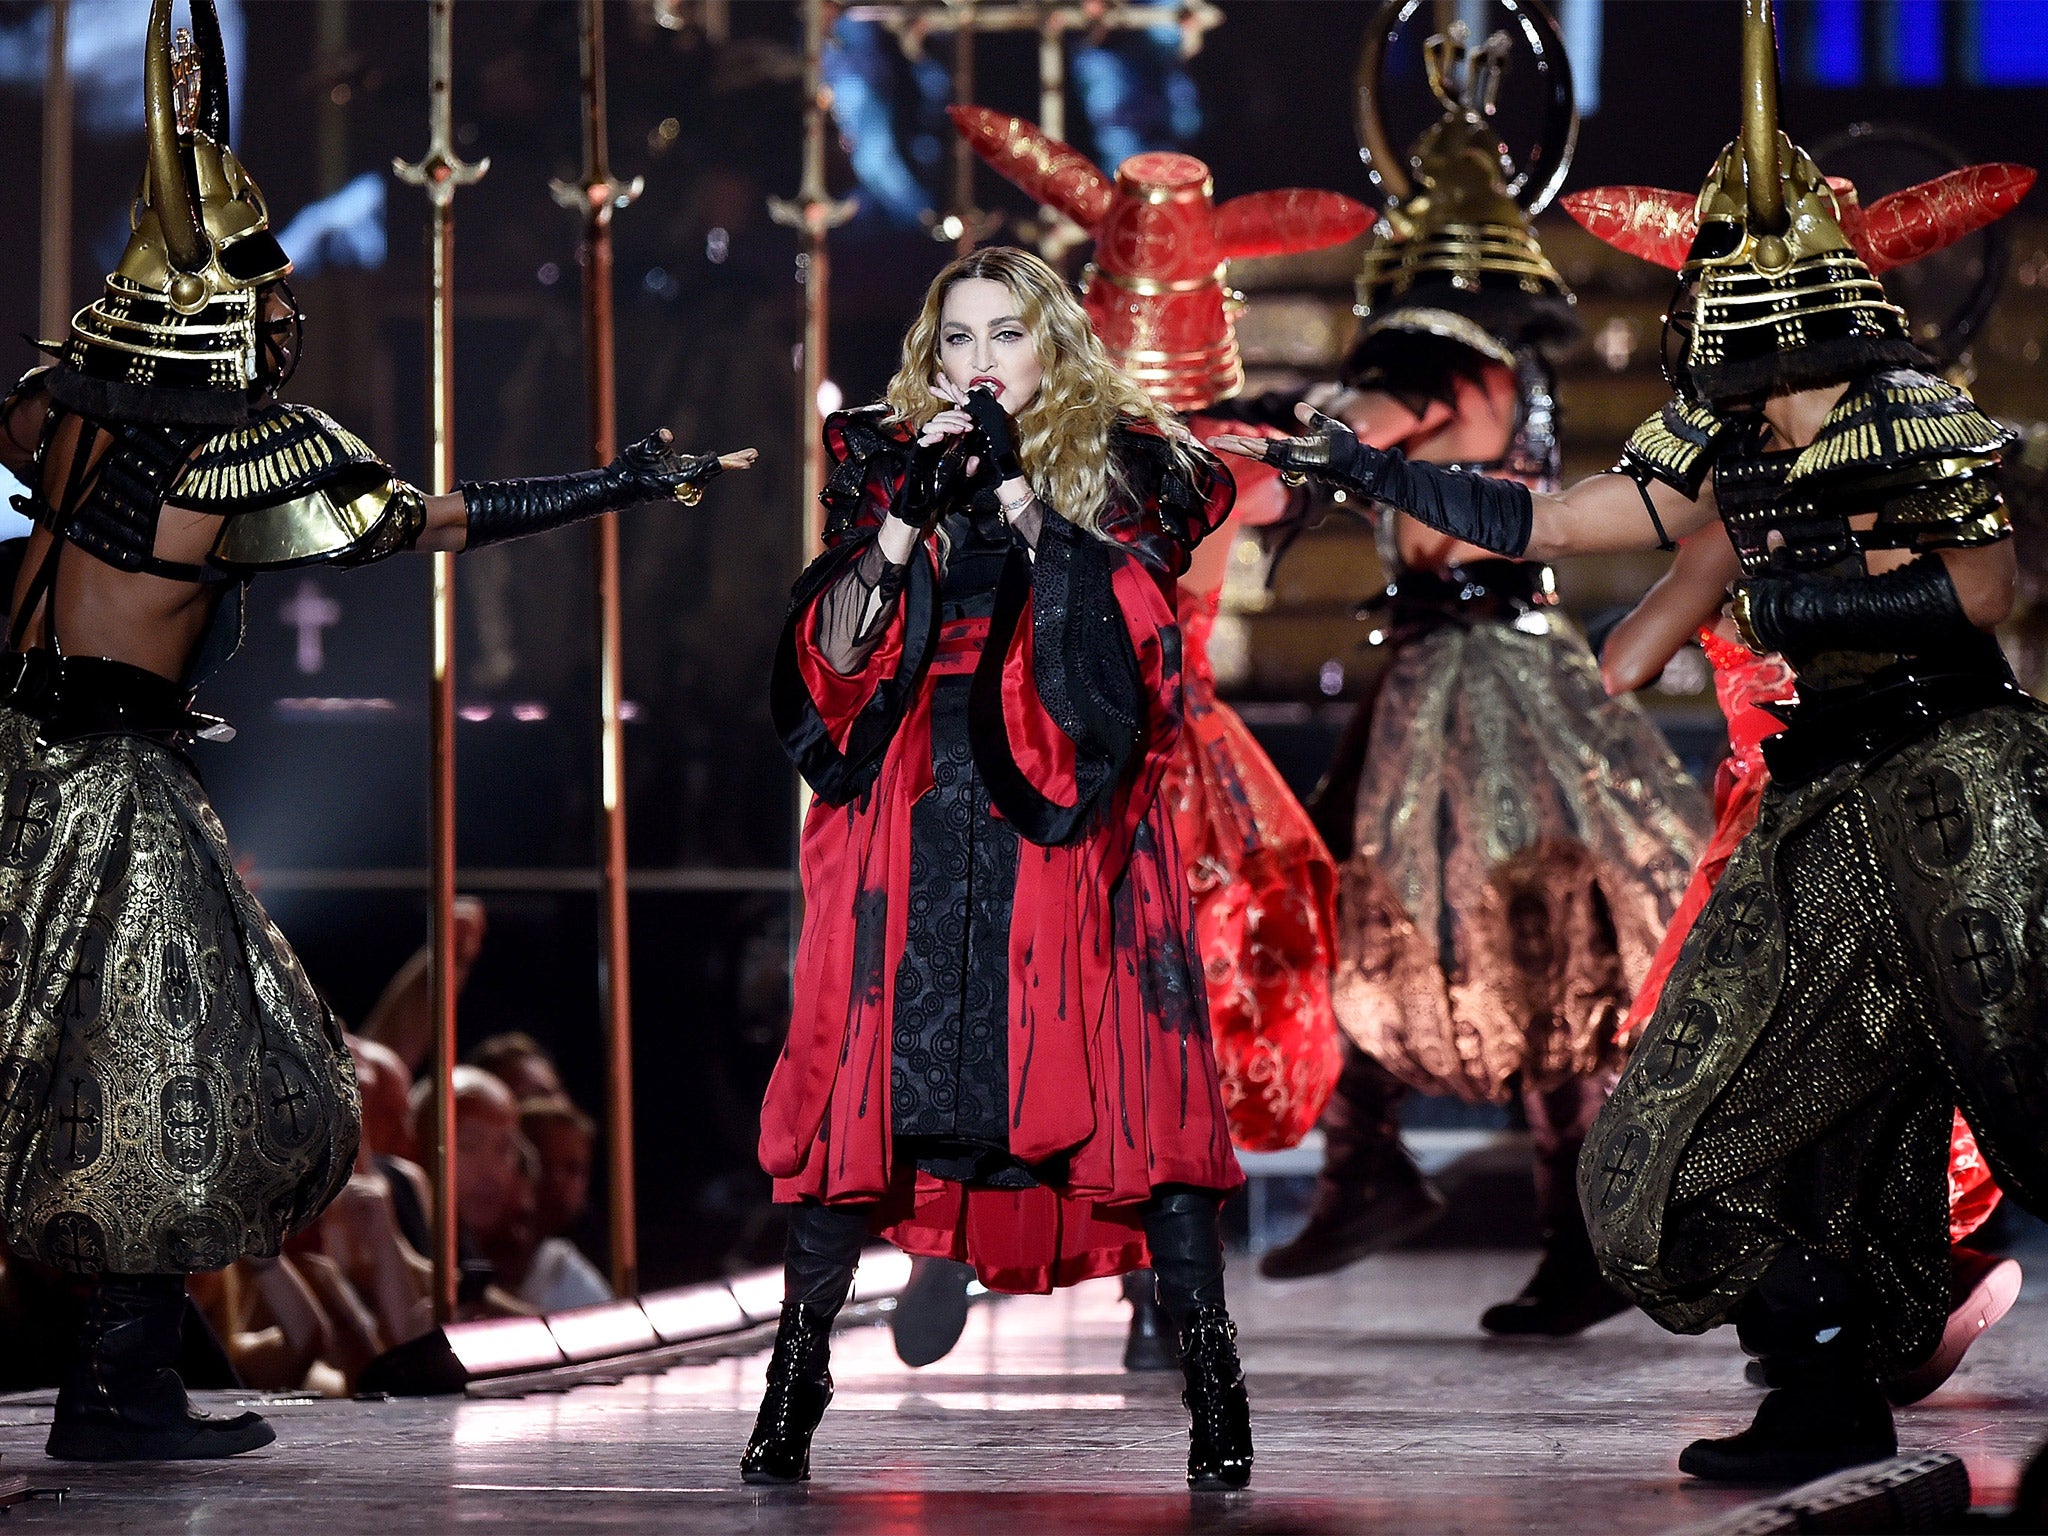 Madonna performs at the O2 as part of her 'Rebel Heart' world tour